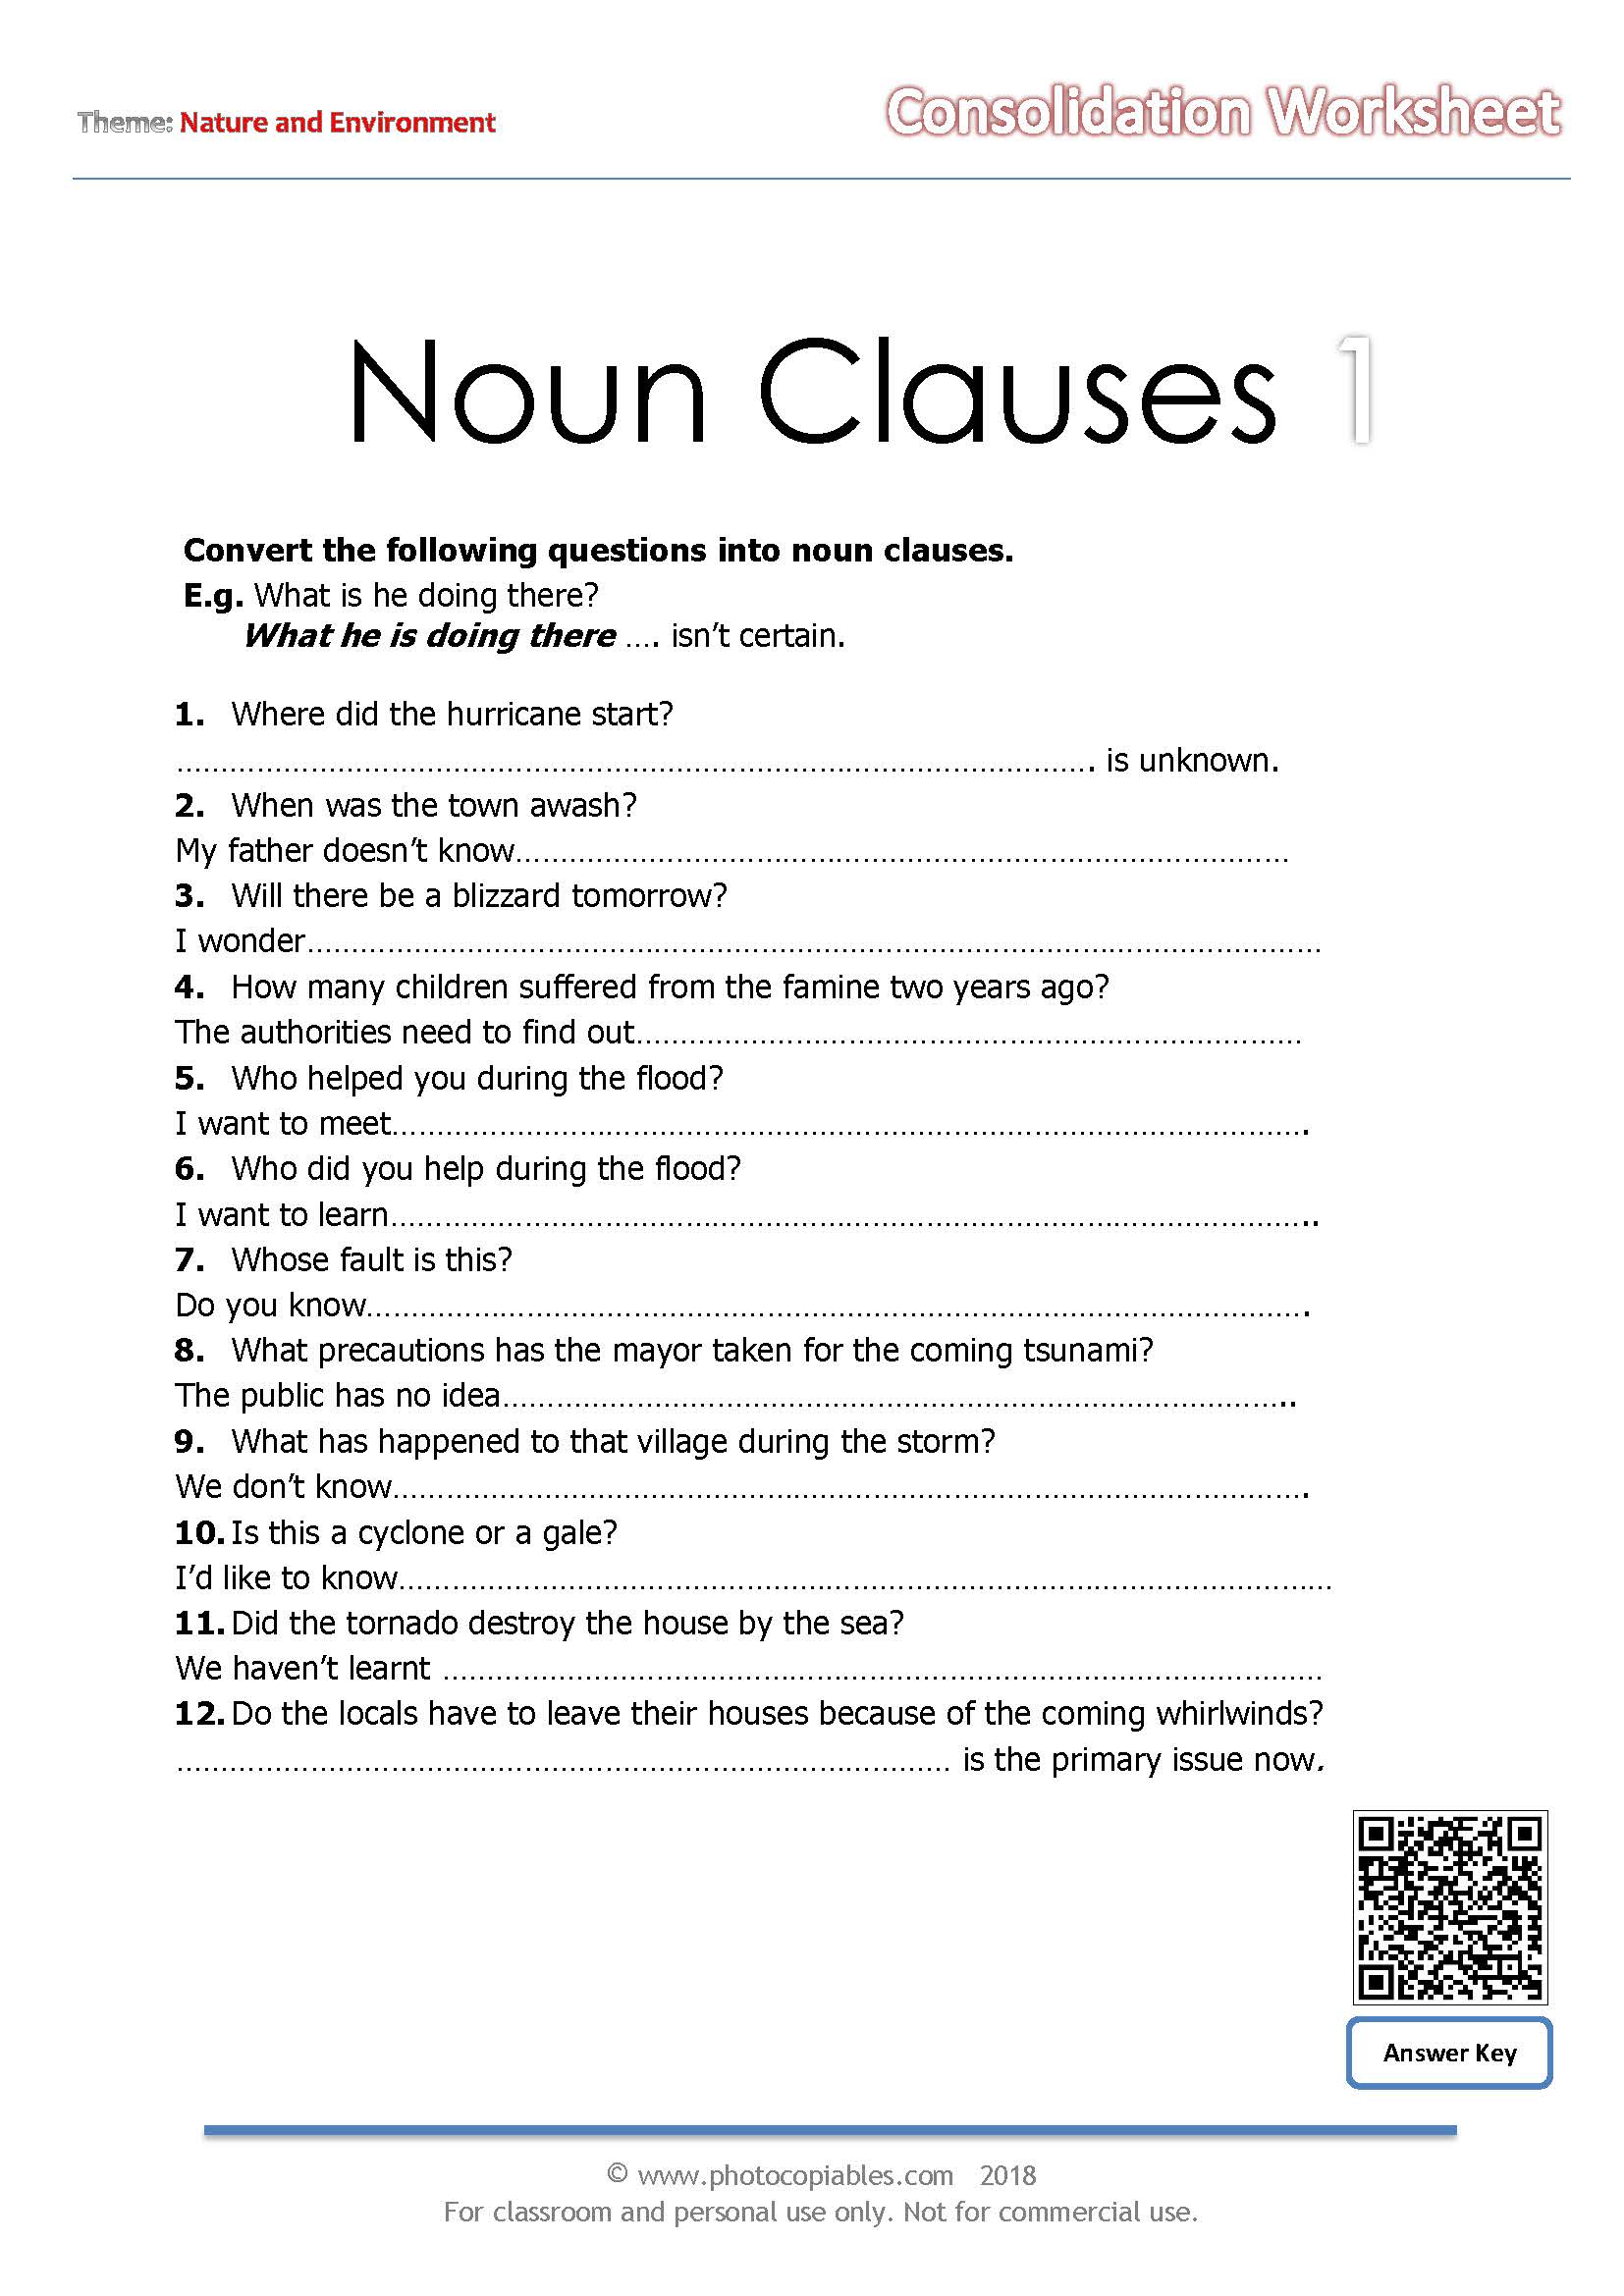 Noun Clauses Consolidation Worksheet 1 Photocopiables